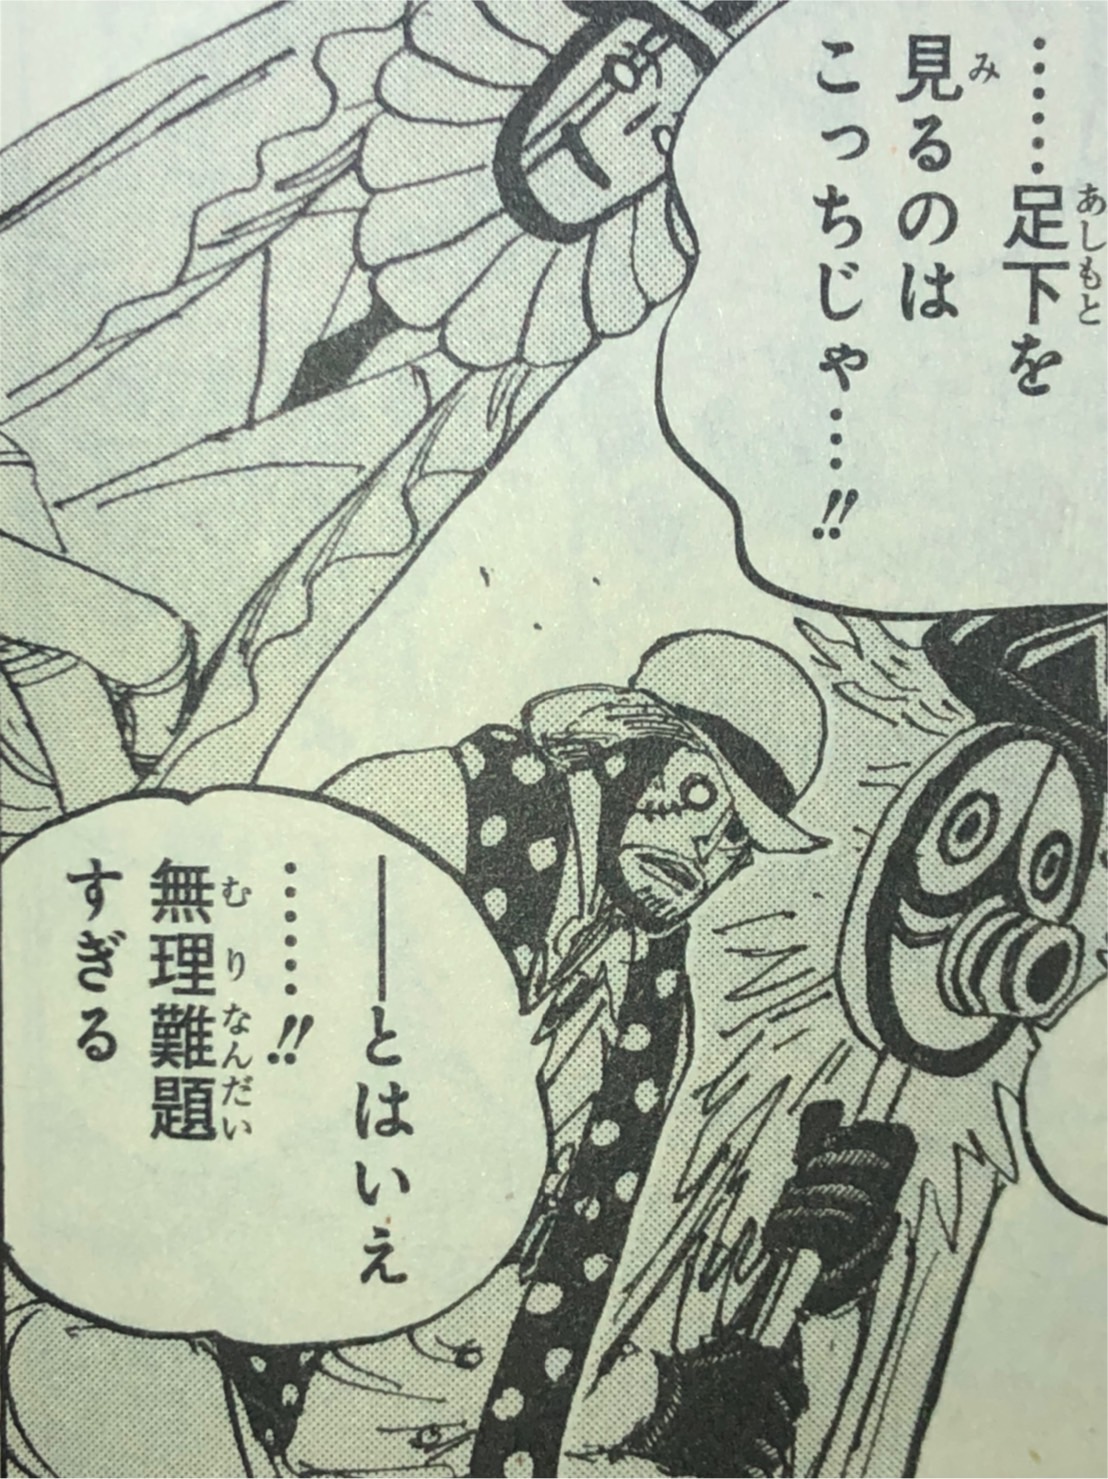 Cp 0は戦争屋 Onepiece第100巻sbs考察 ワンピース考察 甲塚誓ノ介のいい芝居してますね Part 3